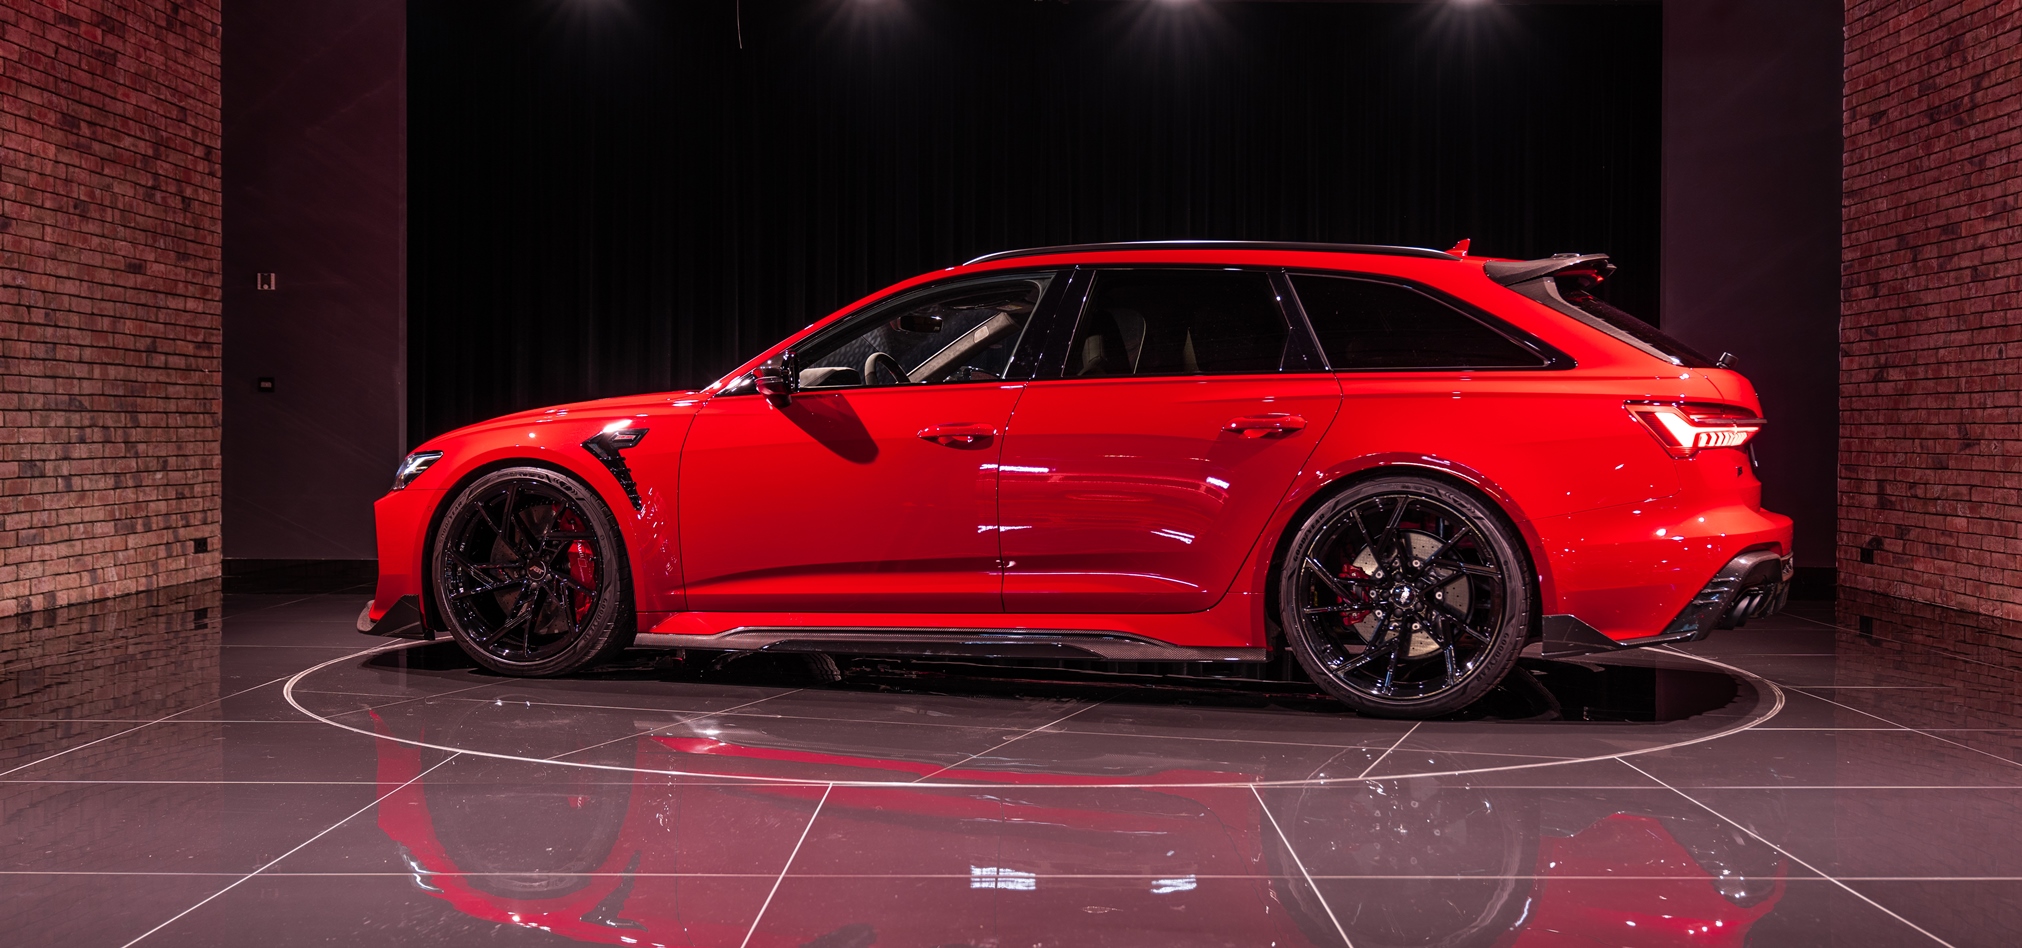 ABT's Audi RS6 Legacy Edition Is A Pricey 750-HP Wagon Limited To 200 Units